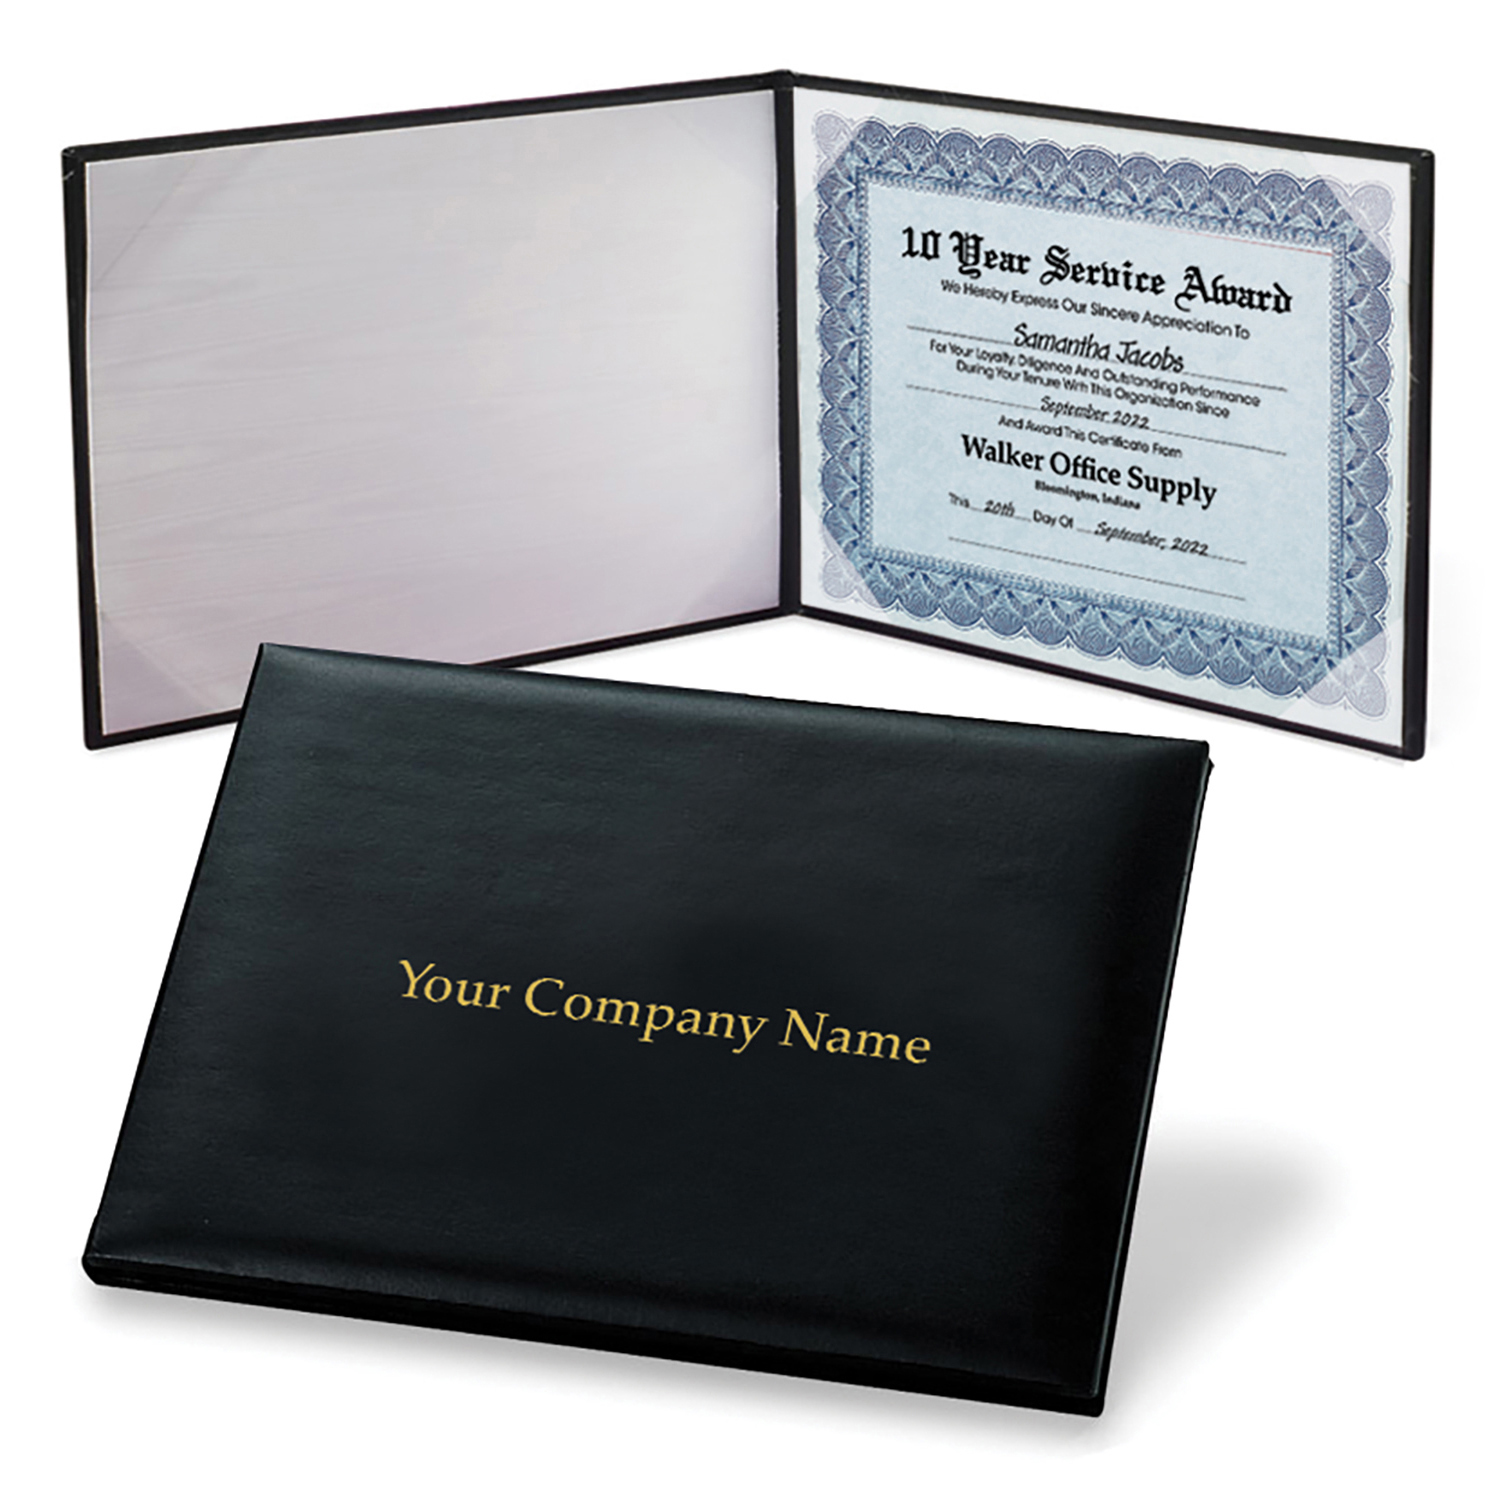 Personalized Leatherette Certificate Jacket